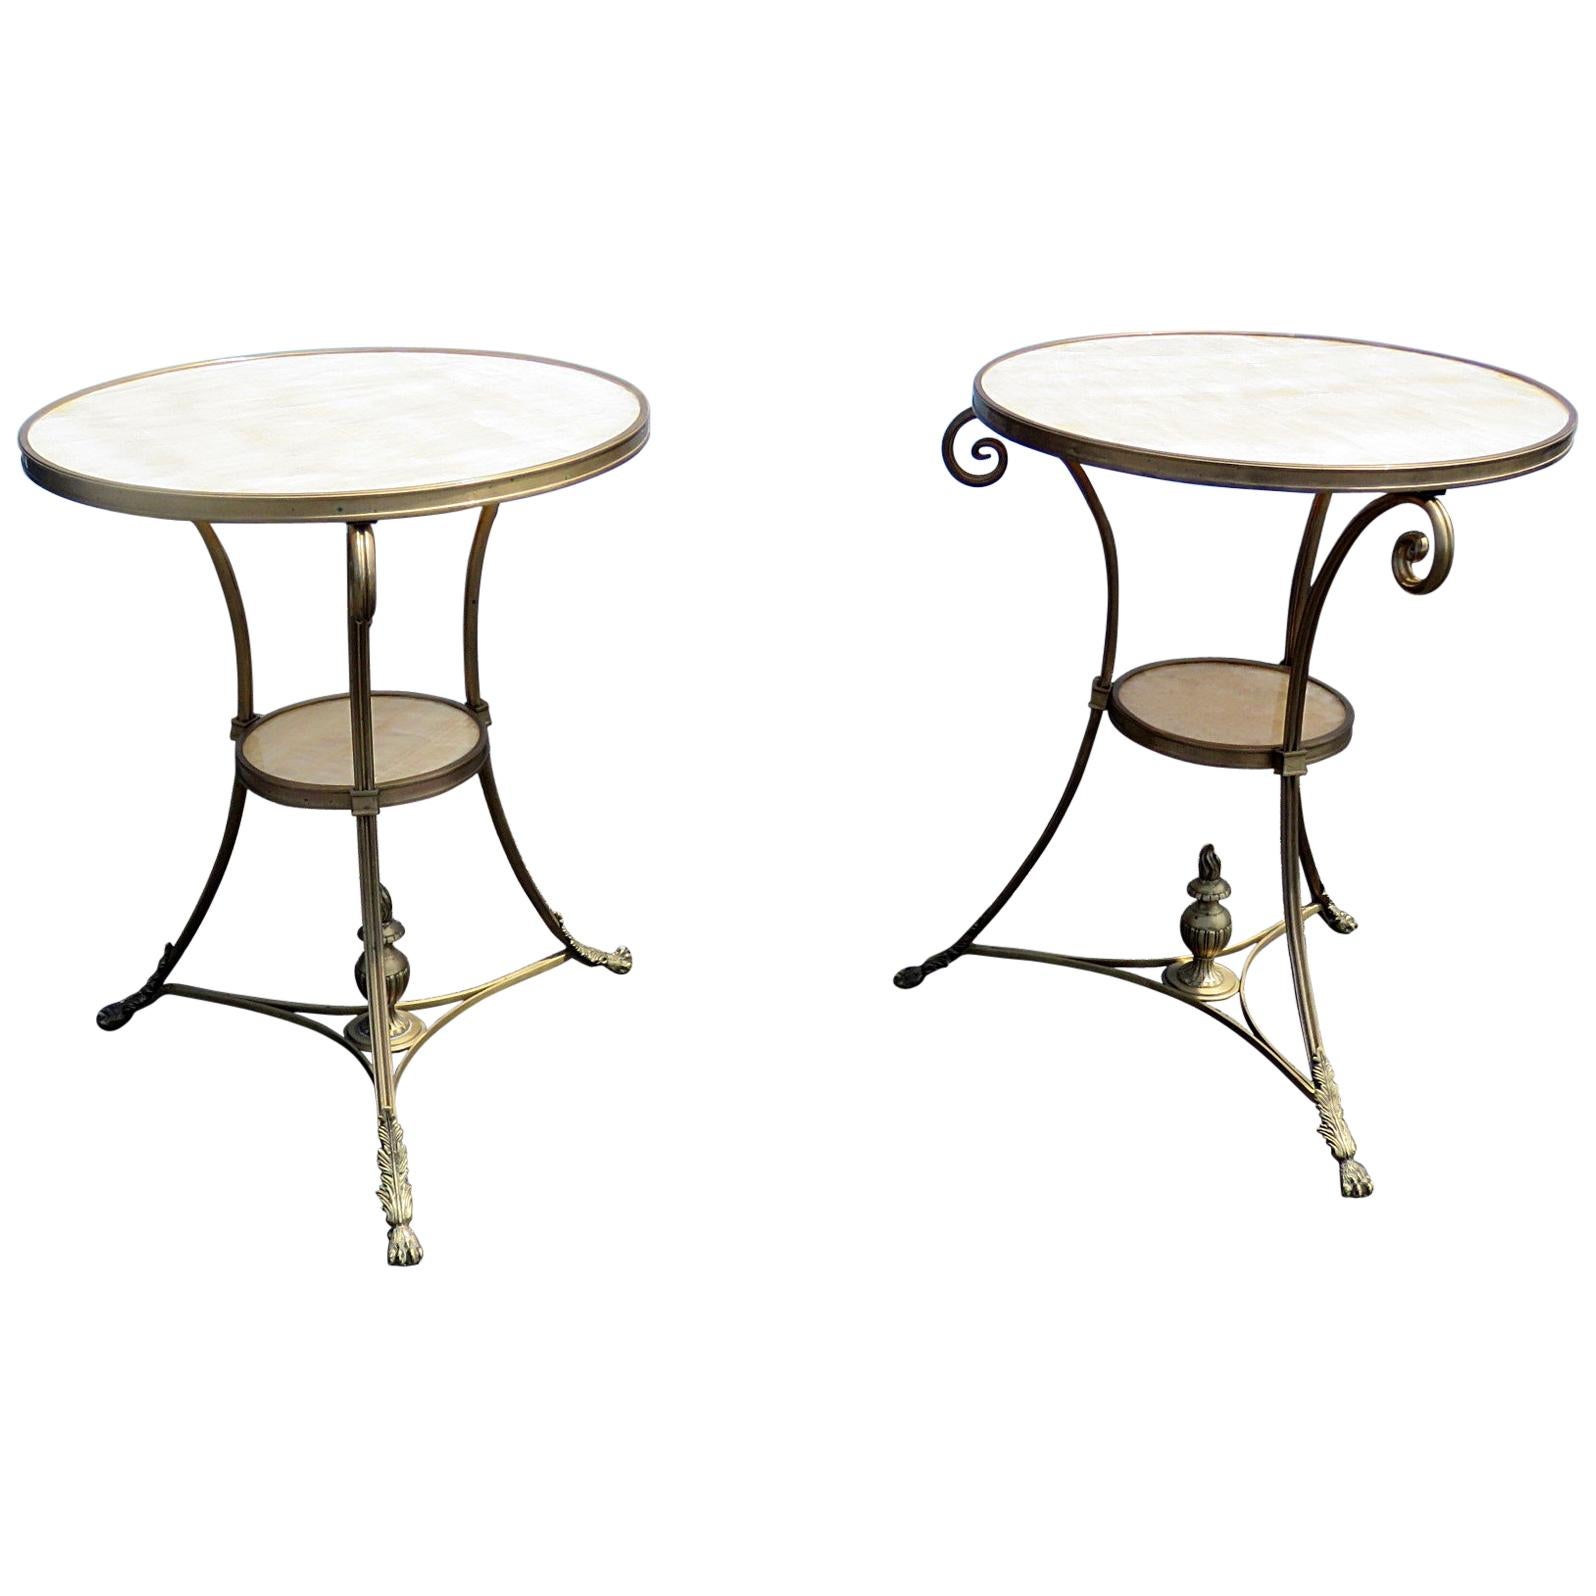 Pair of Alabaster Marble Top French Bronze Regency Style Gueridons Side Tables